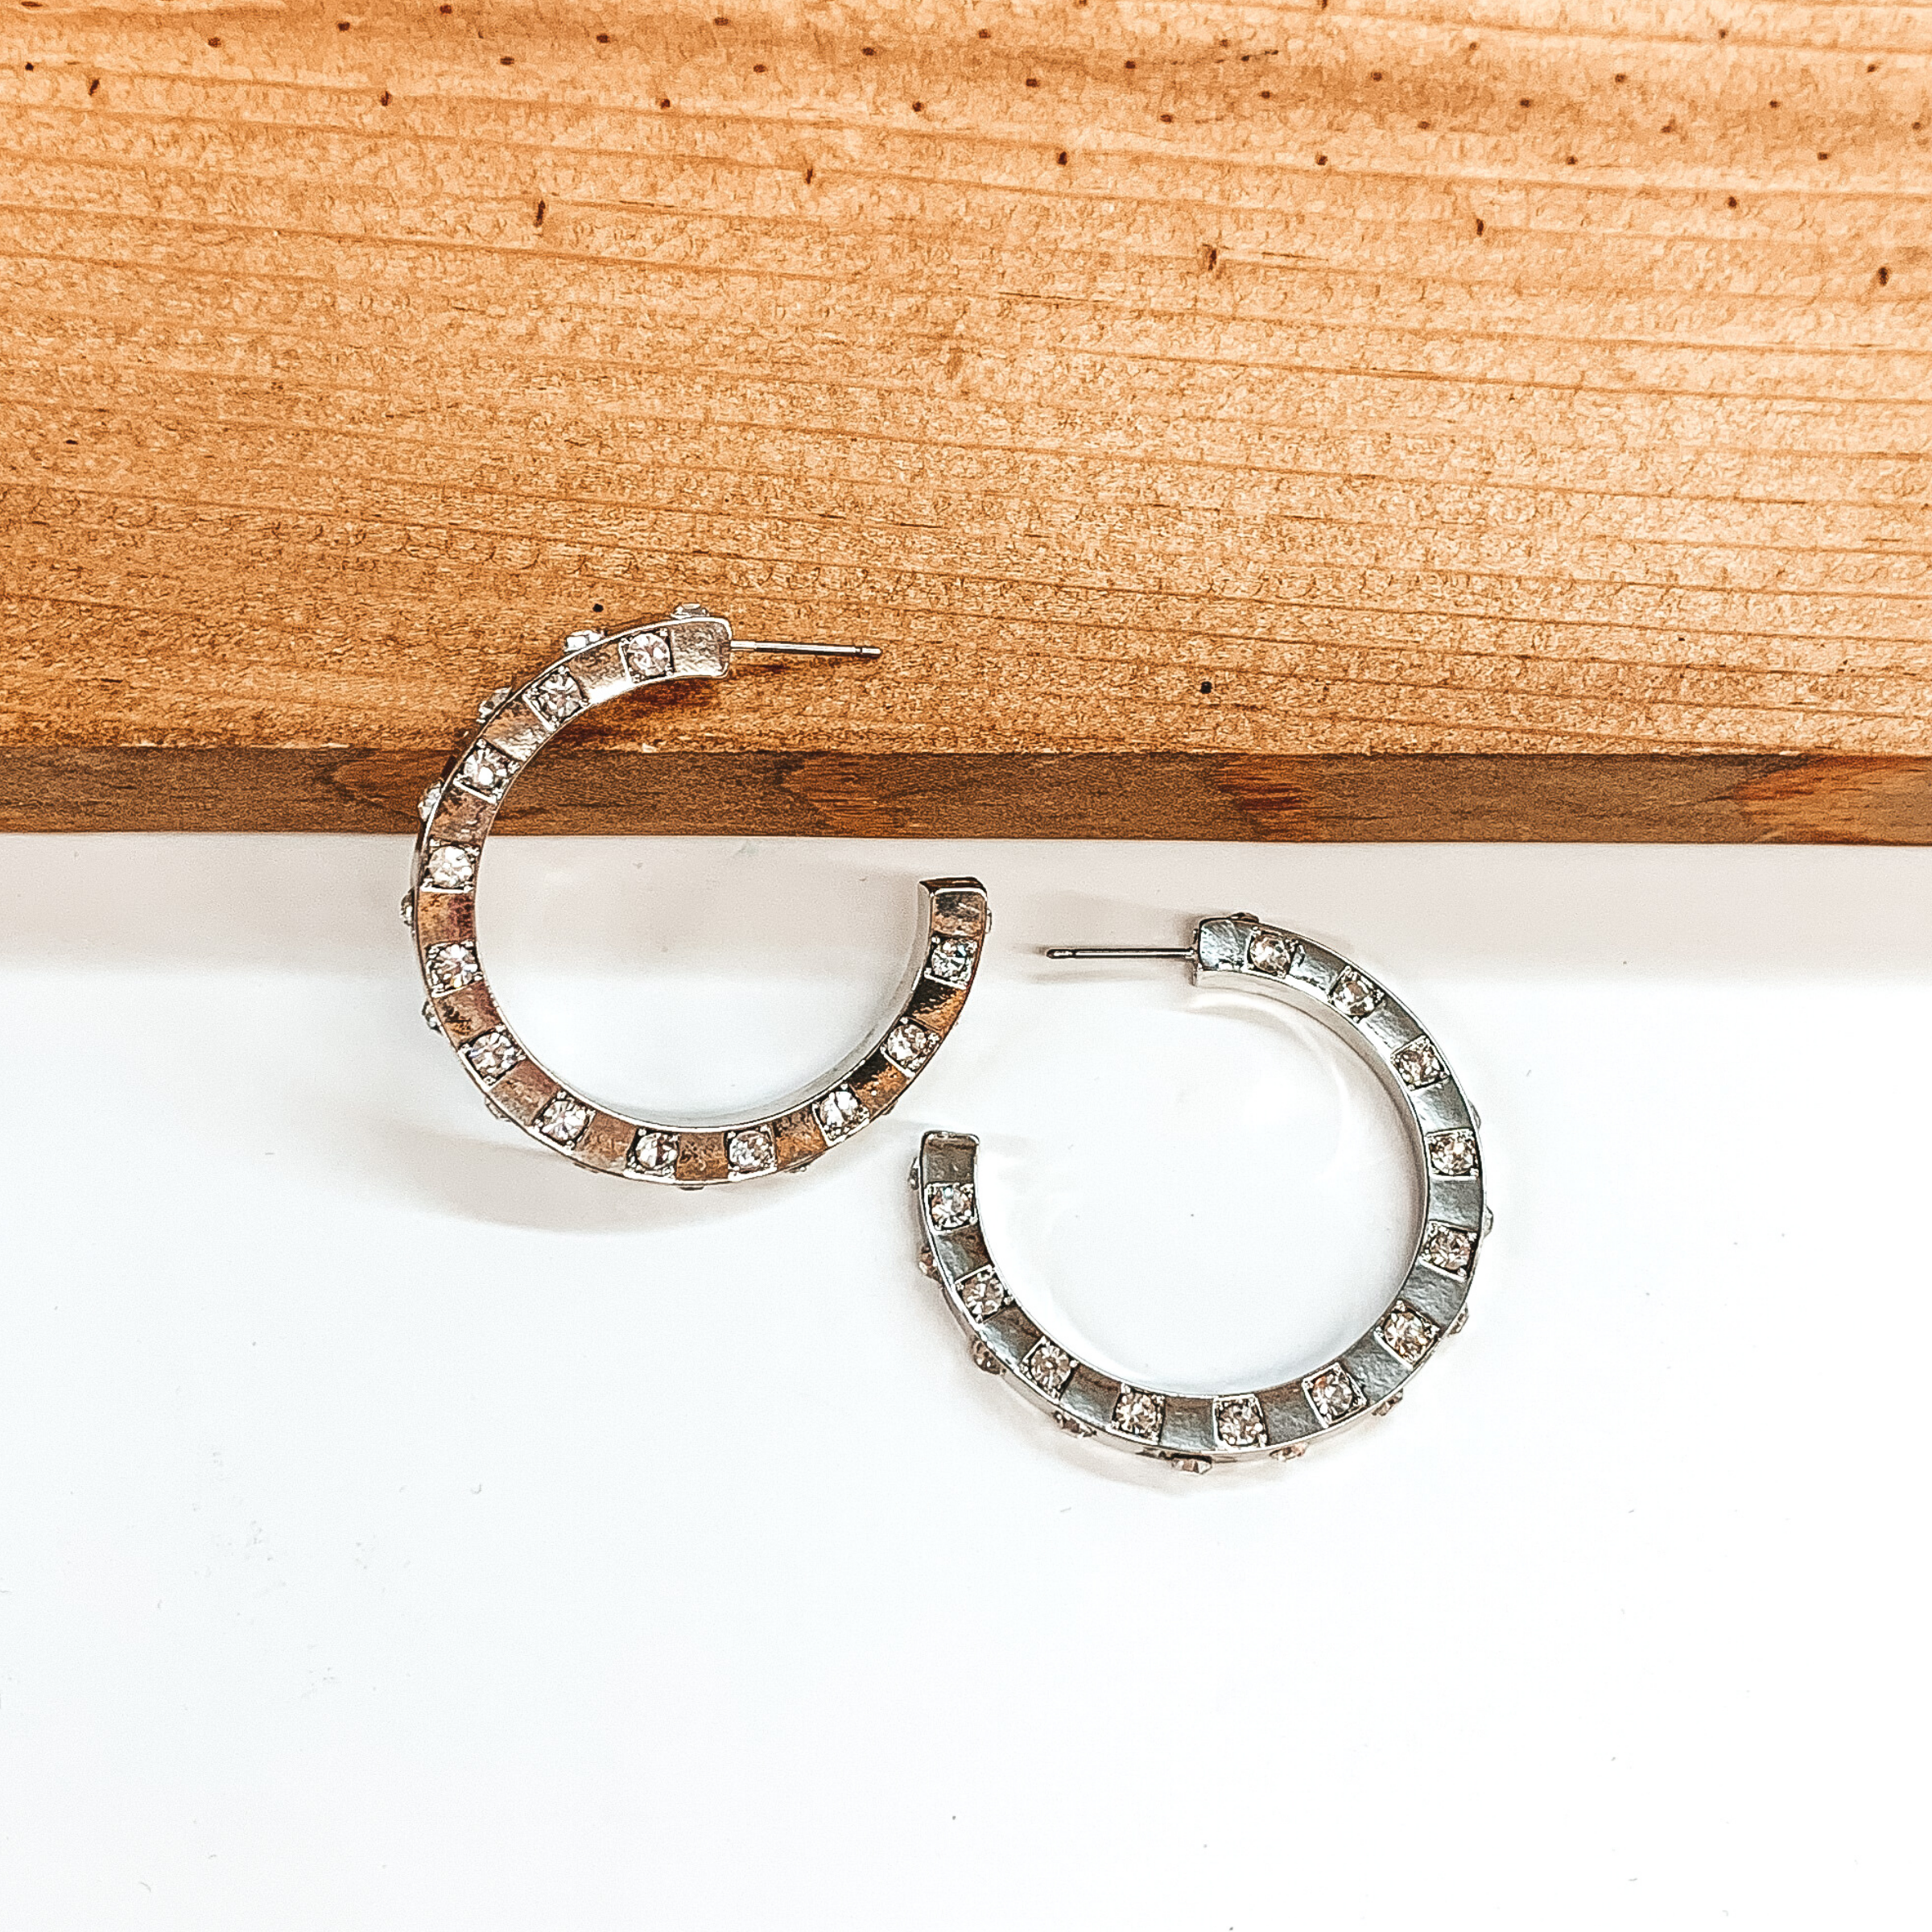 Silver hoop earrings with spaced out clear crystals. One earrings is pictured laying on a brown block while the other earrings is pictured laying flat on the white background. 